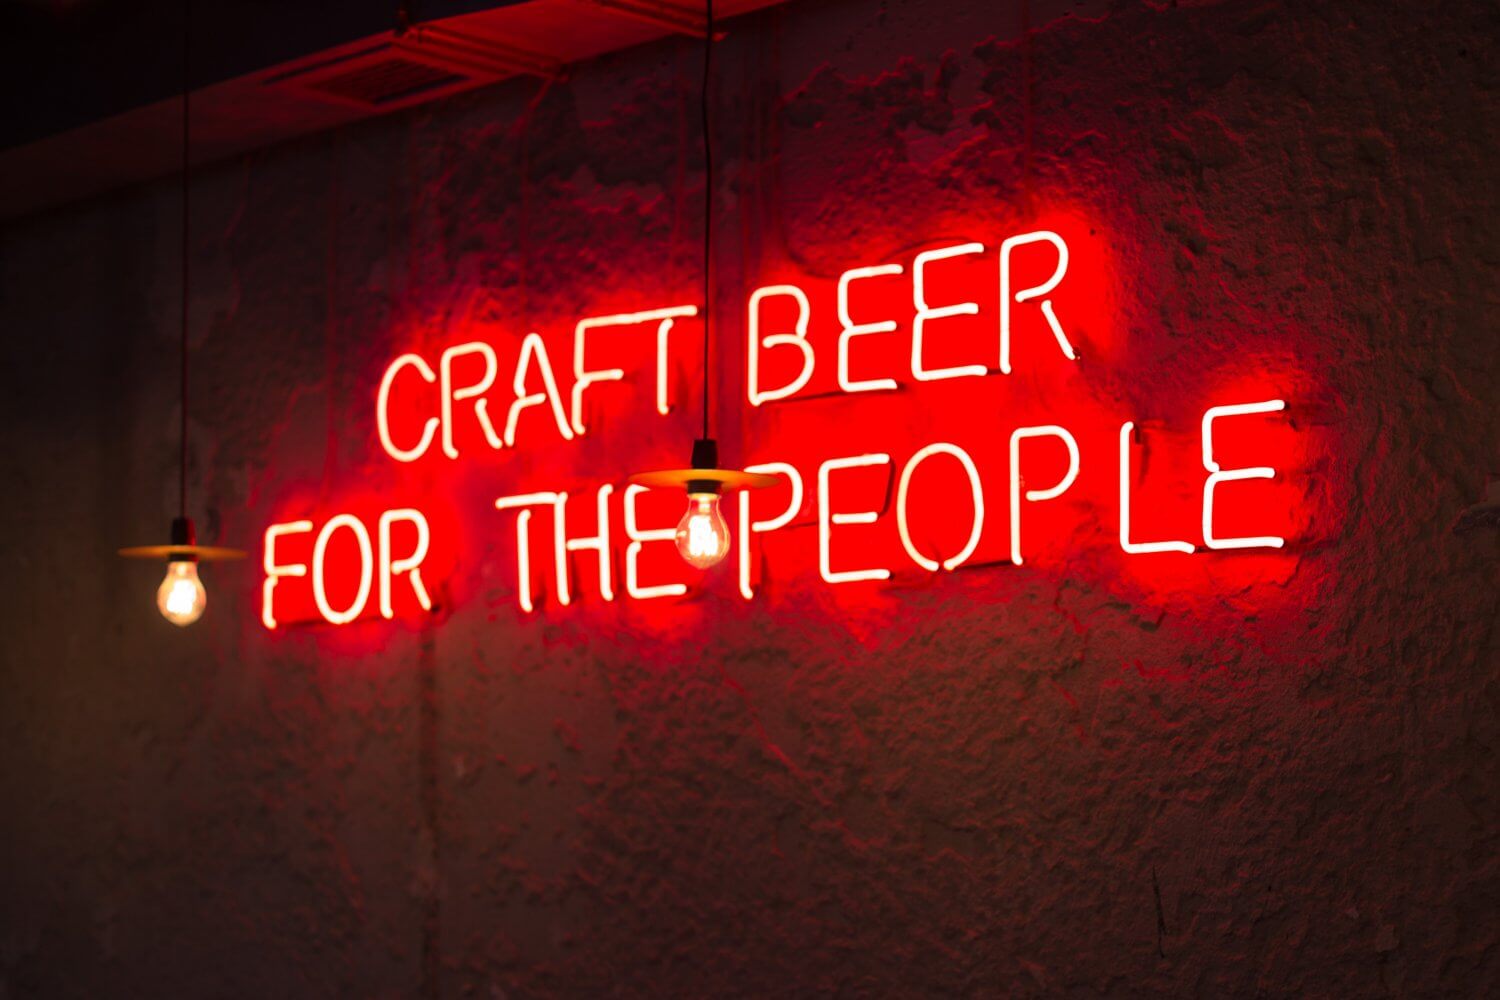 craft-beer-for-the-people-1500x1000.jpg